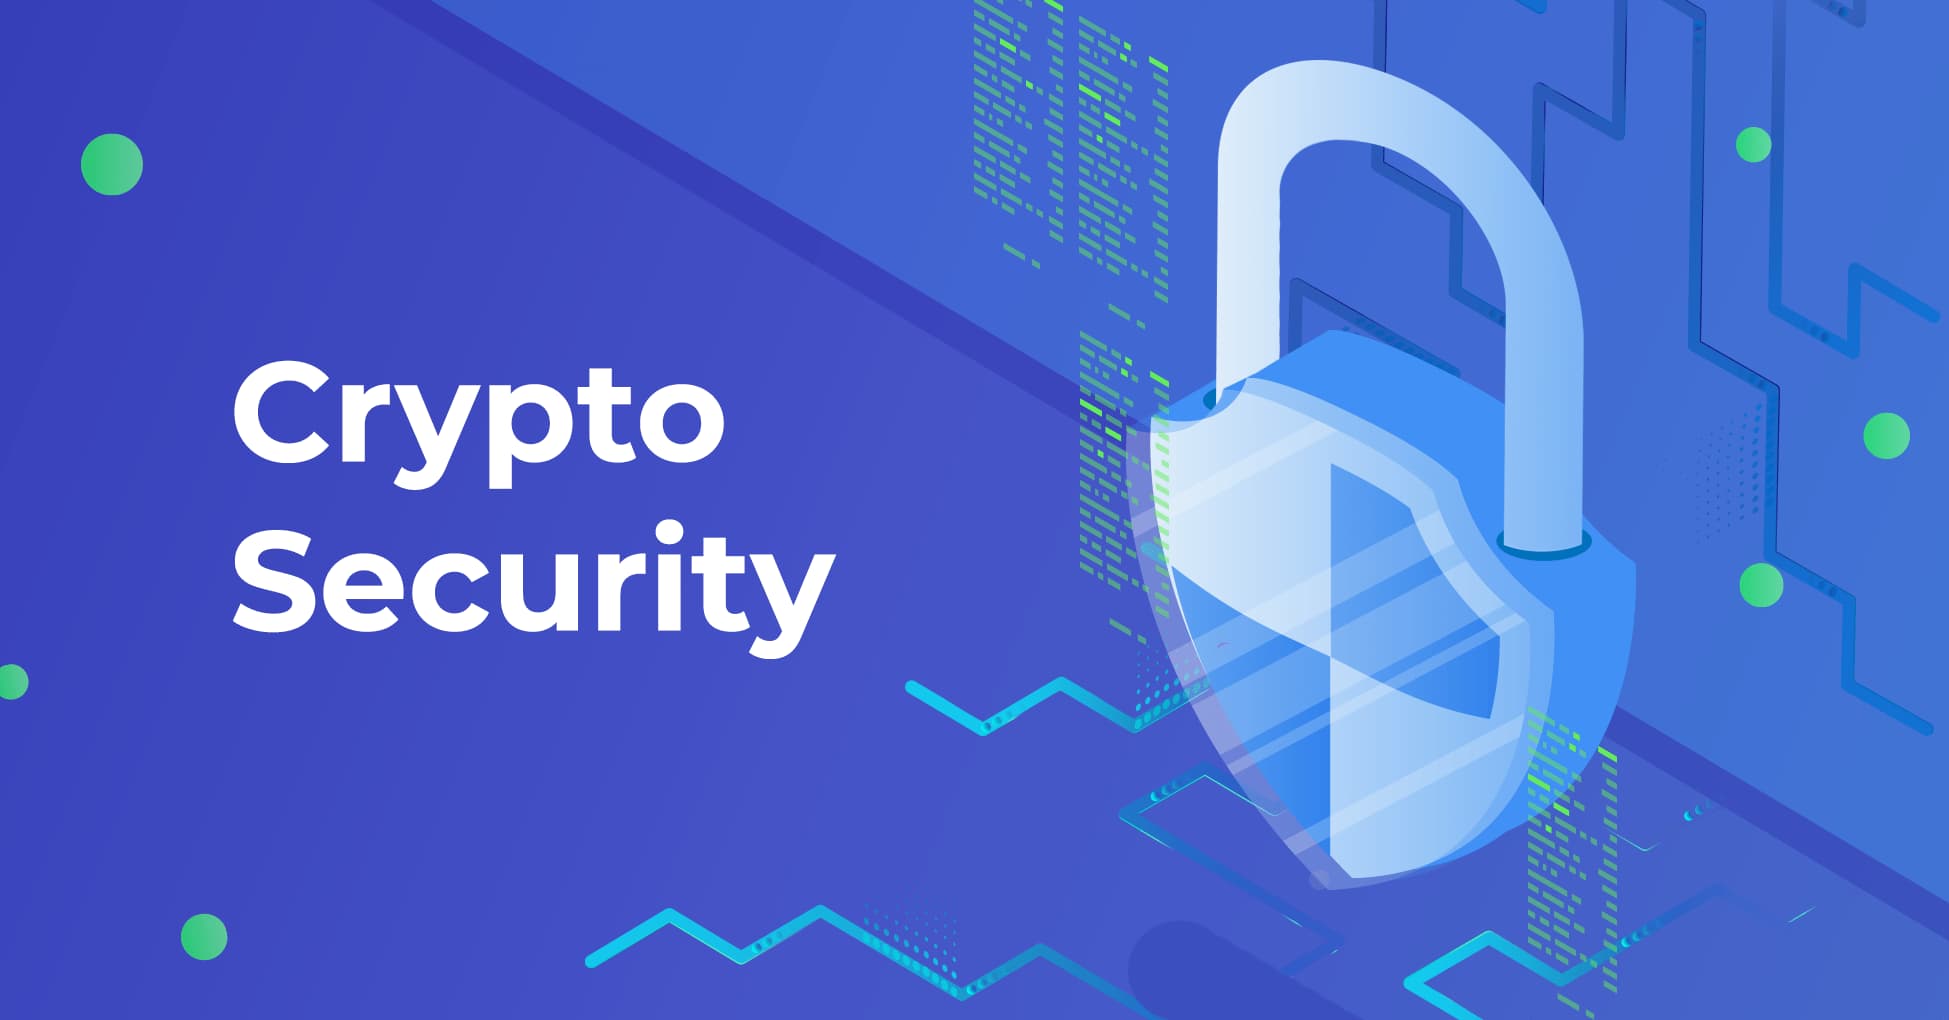 Cryptocurrency security